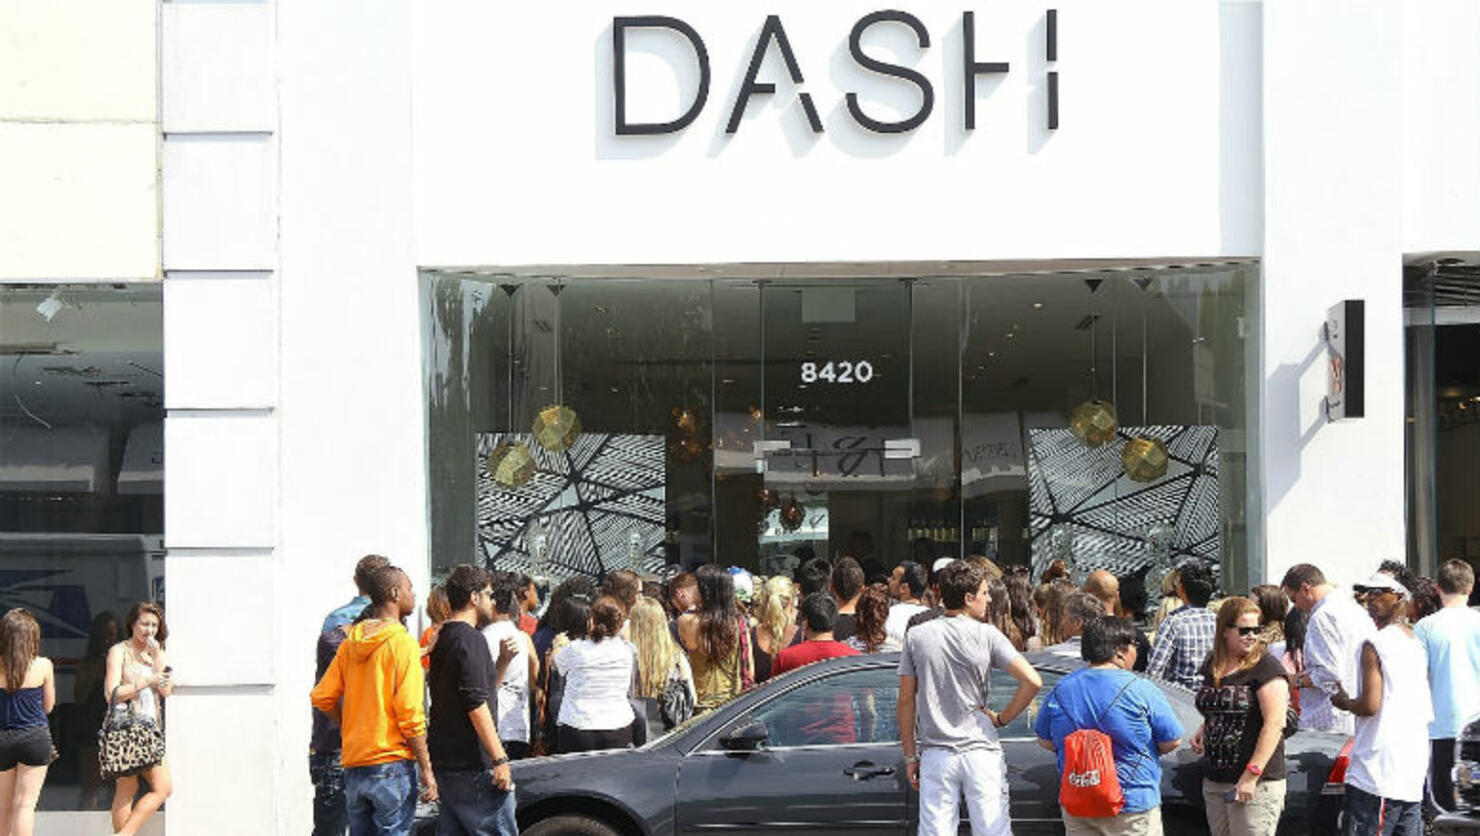 The Kardashians' DASH Boutique Has Been in Business for 10 Years